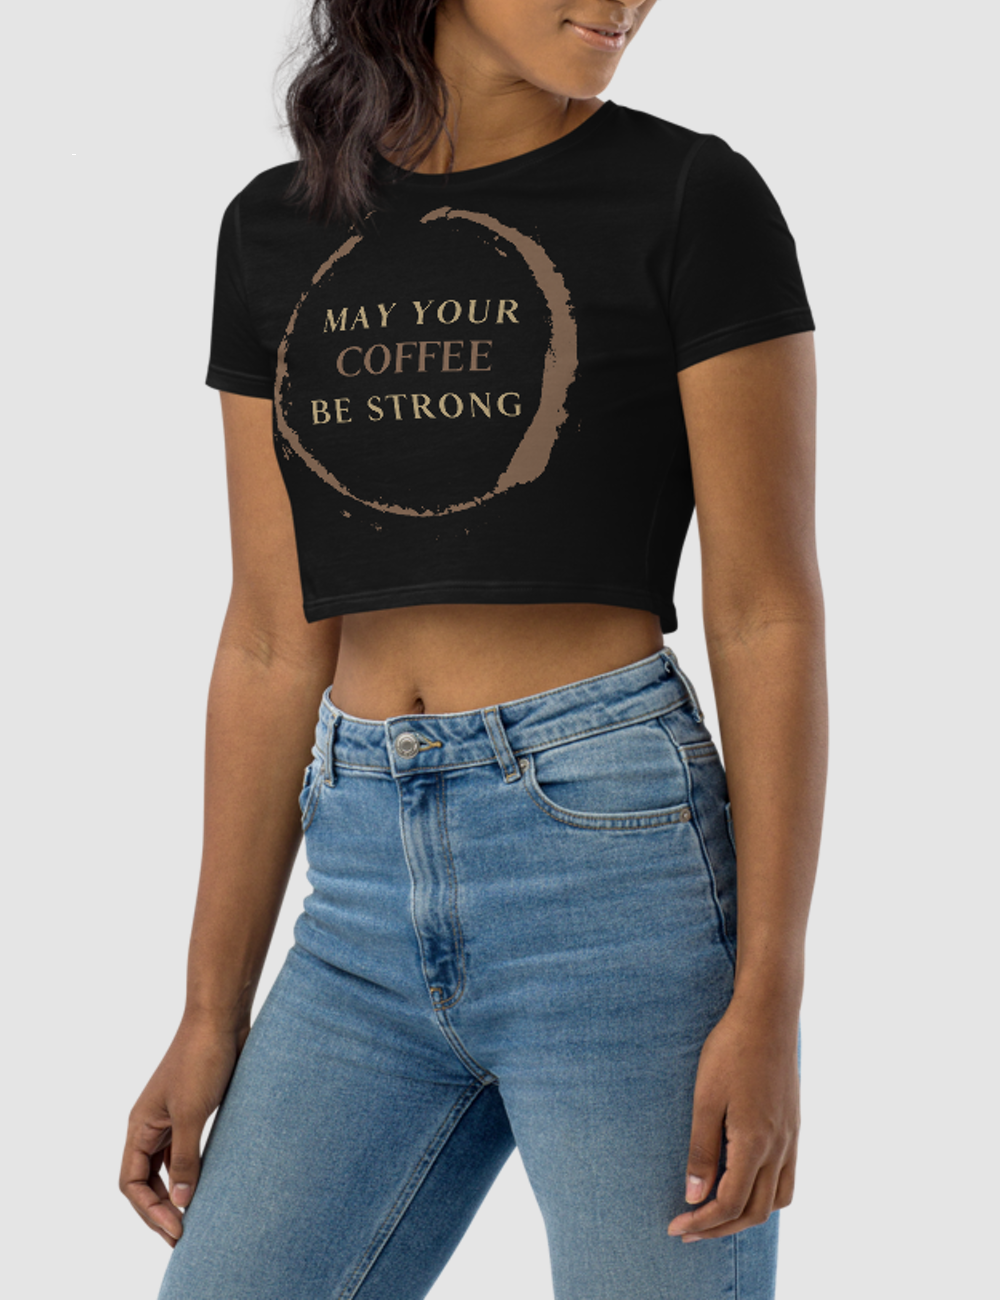 May Your Coffee Be Strong Women's Fitted Crop Top T-Shirt OniTakai